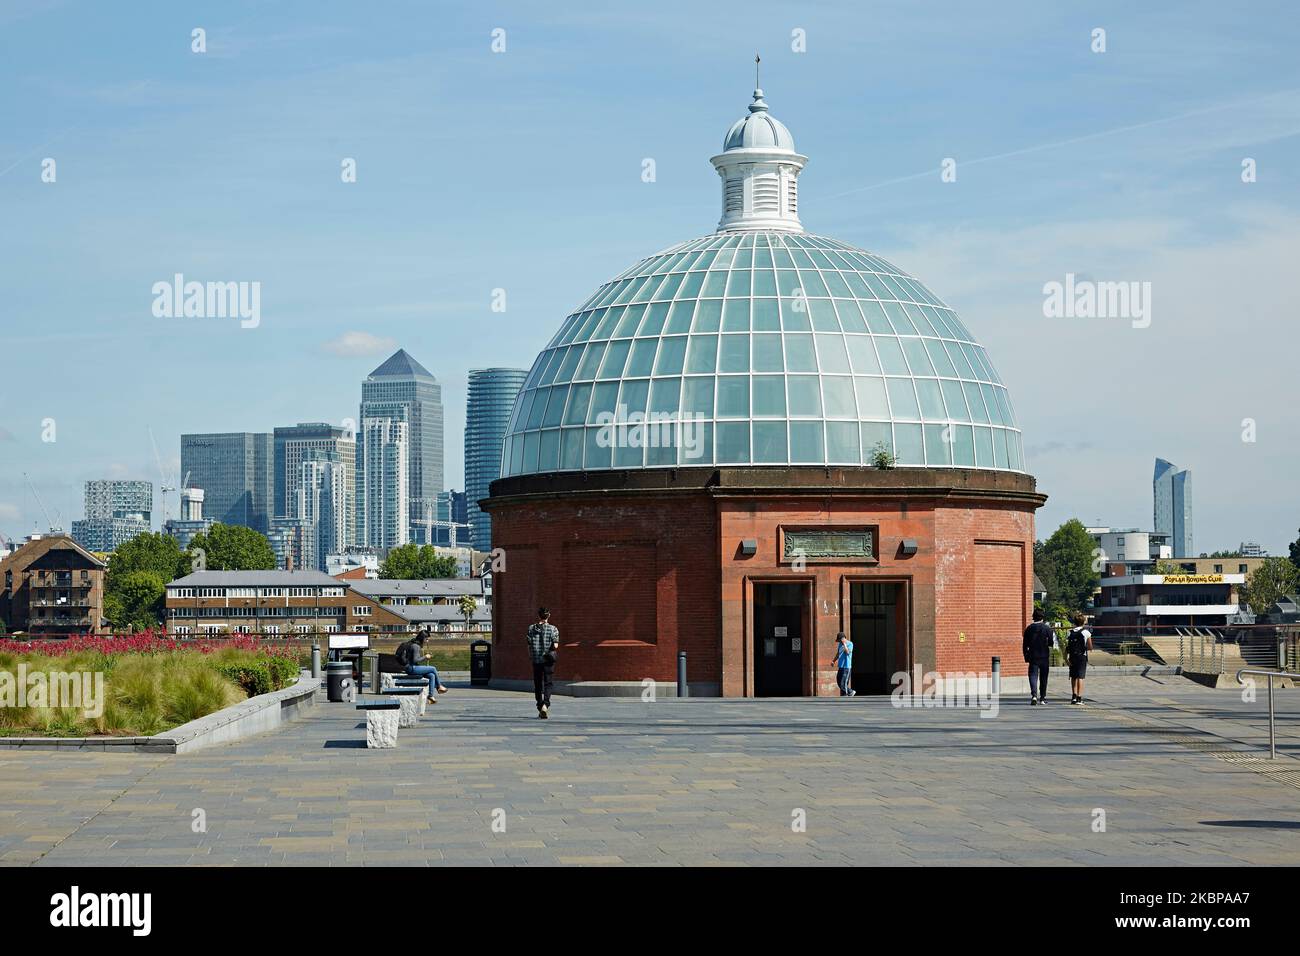 © 2022 John Angerson Greenwich foot tunnel. Greenwich, Londres. Banque D'Images